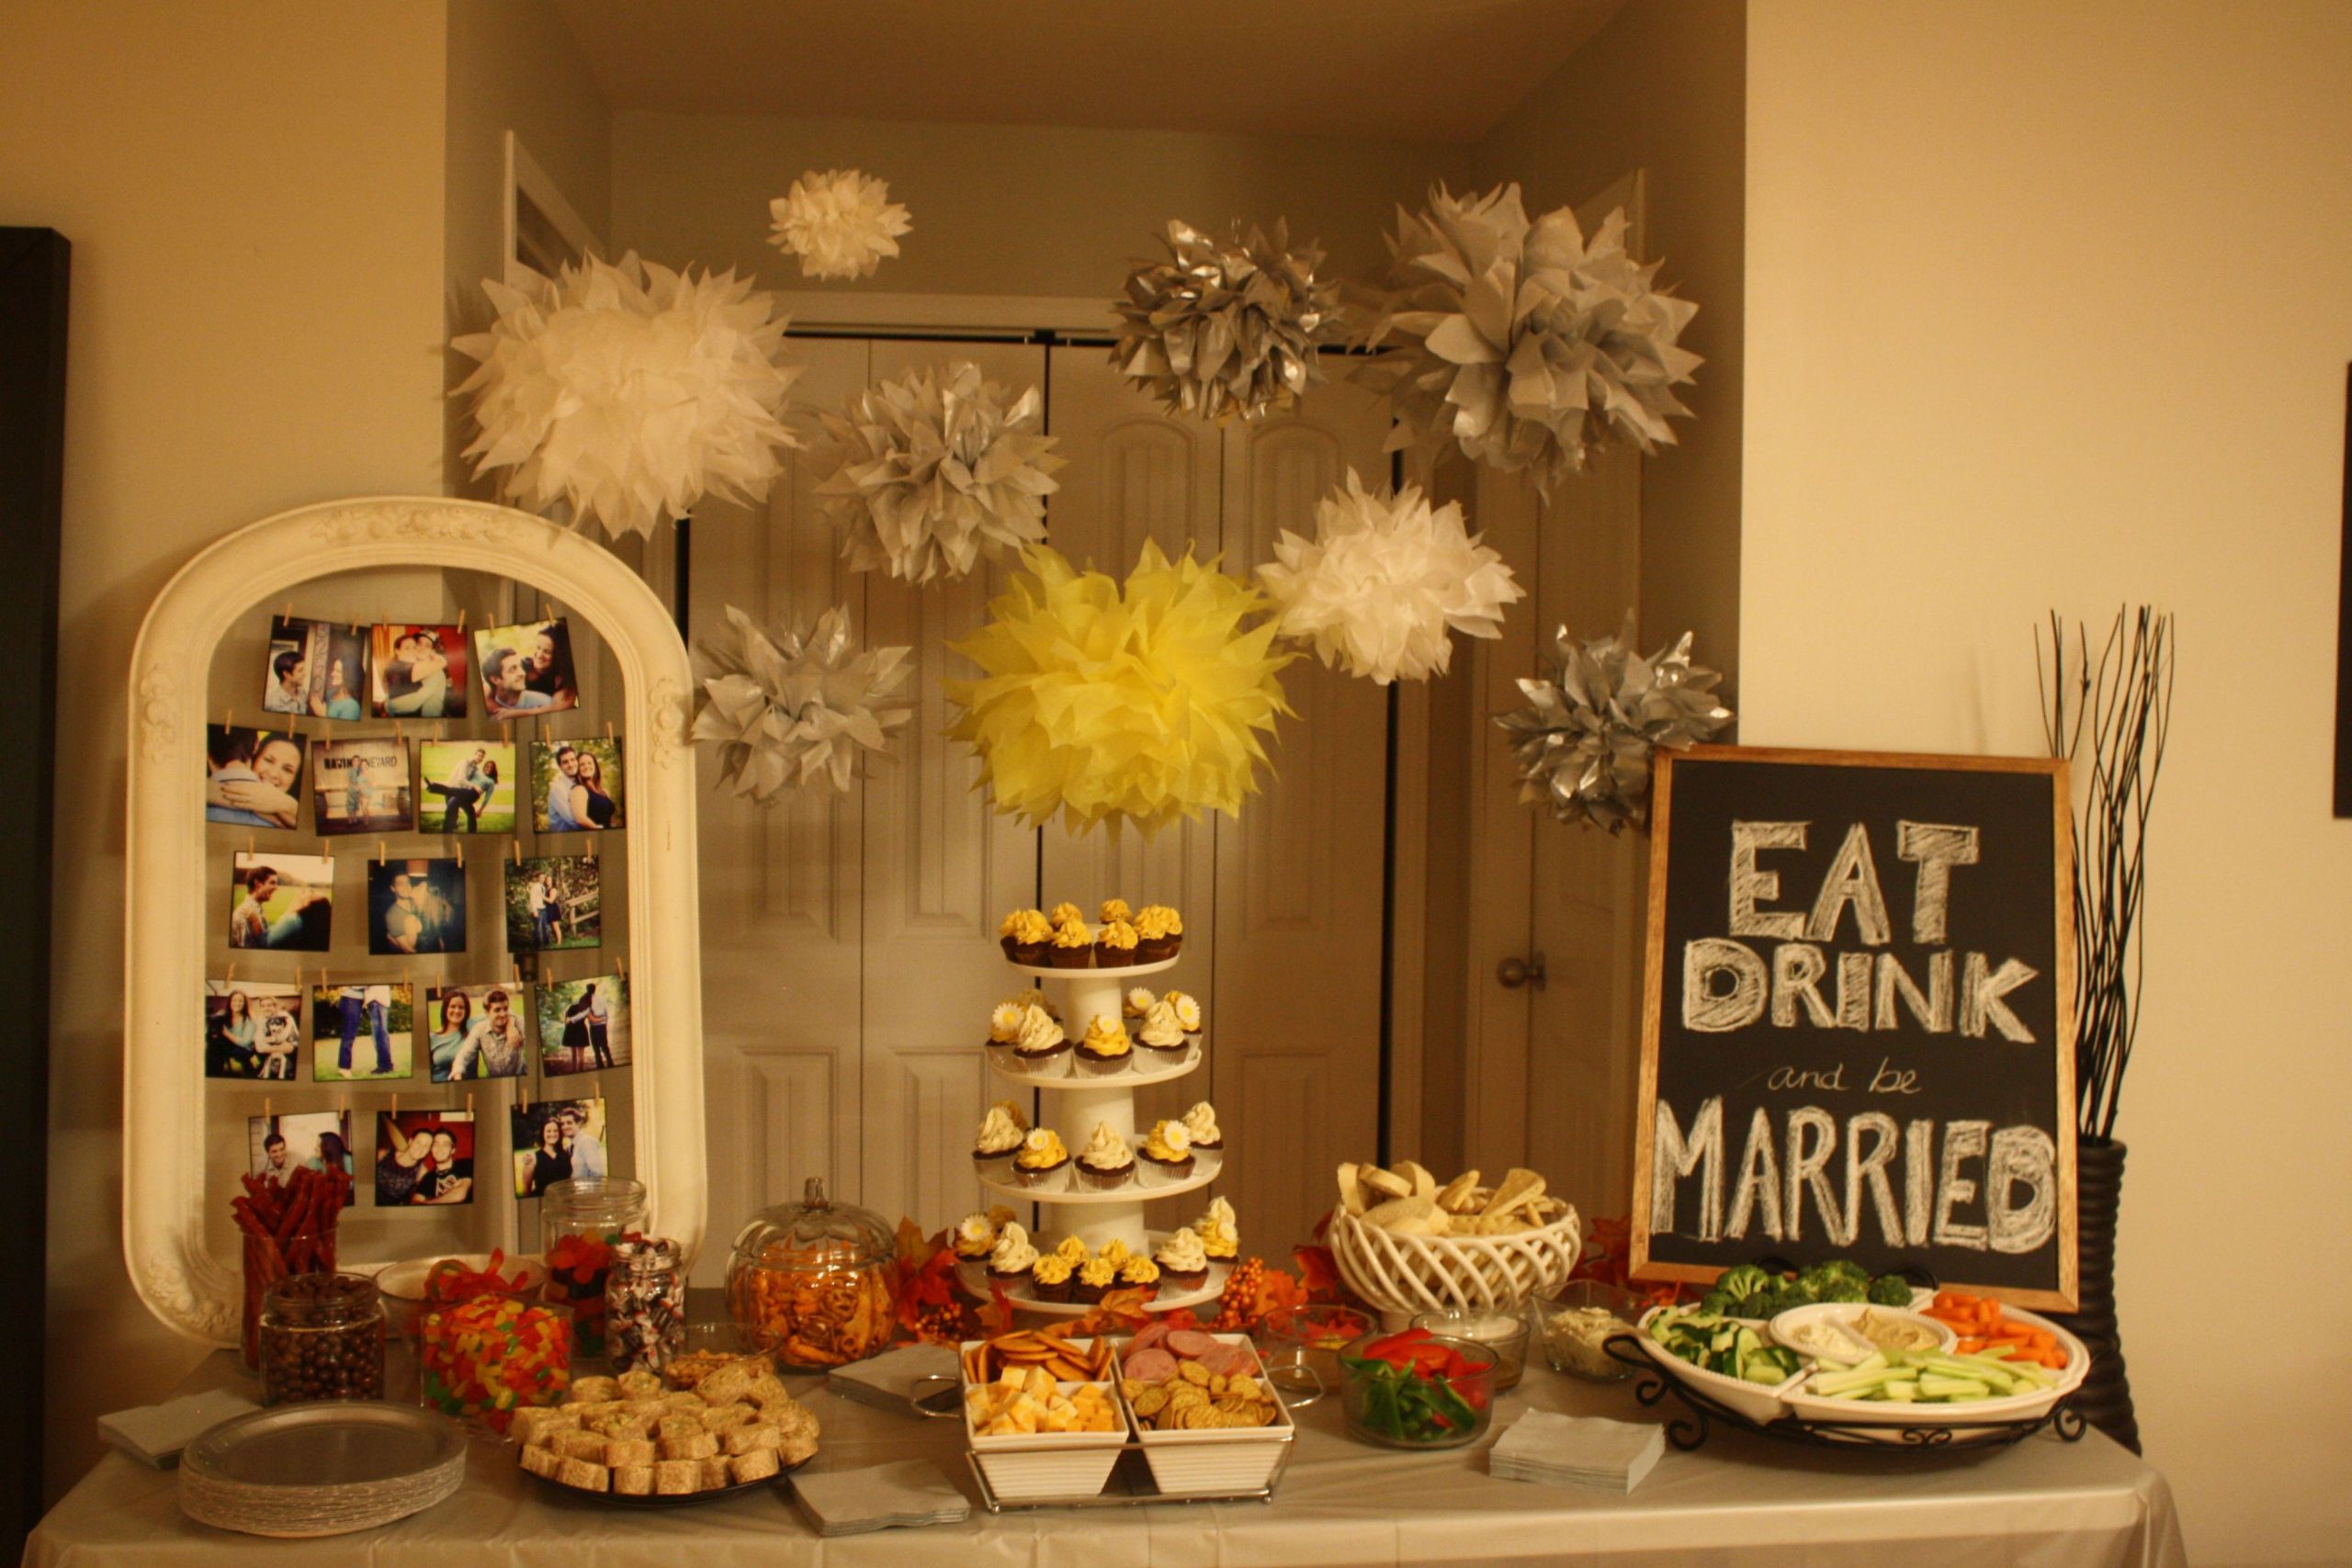 Pinterest Engagement Party Ideas
 Engagement Party Decorations My Pinterest inspired DIY